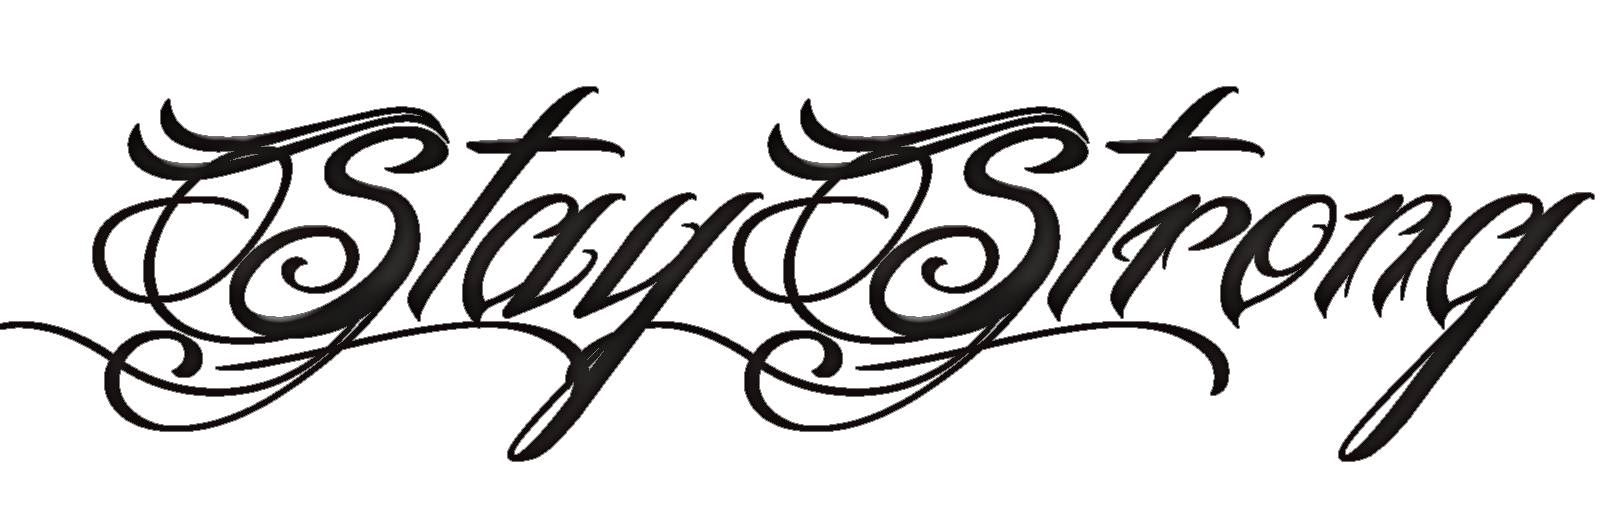 Pack Png Del Tatto Stay Strong De Demi Lovato By Ohmybieberlovarou